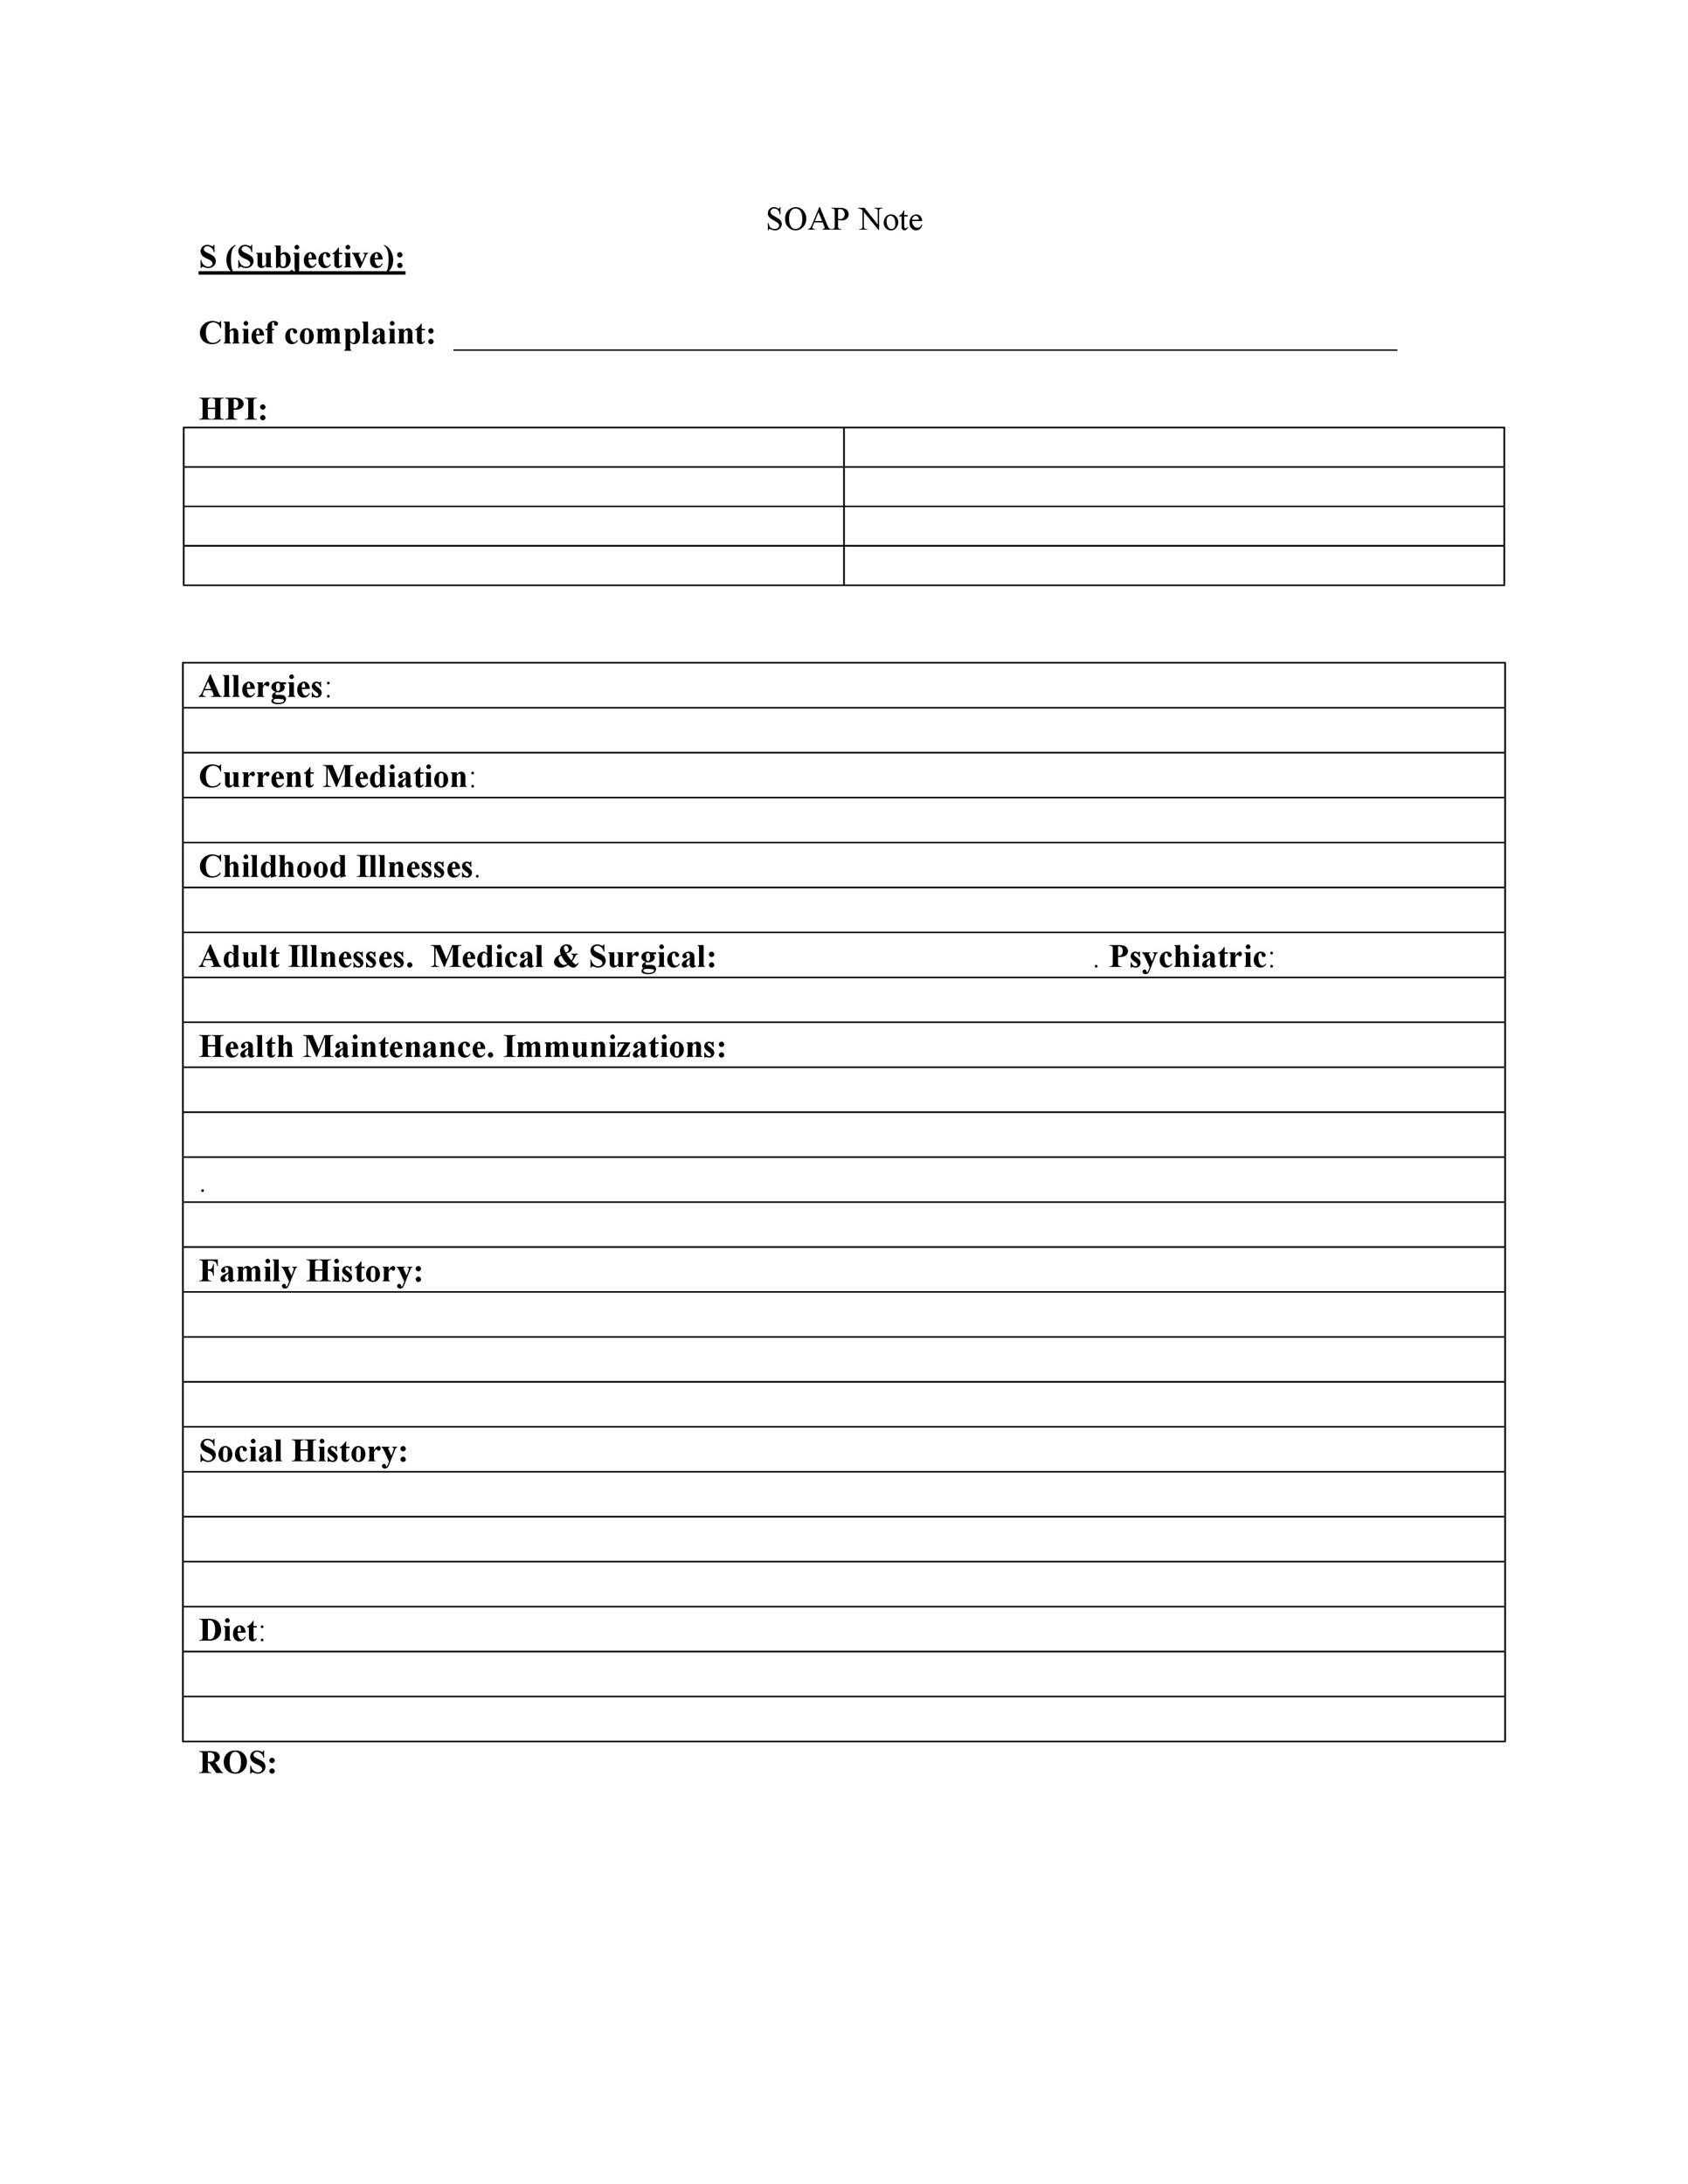 Free Soap Note Template 07